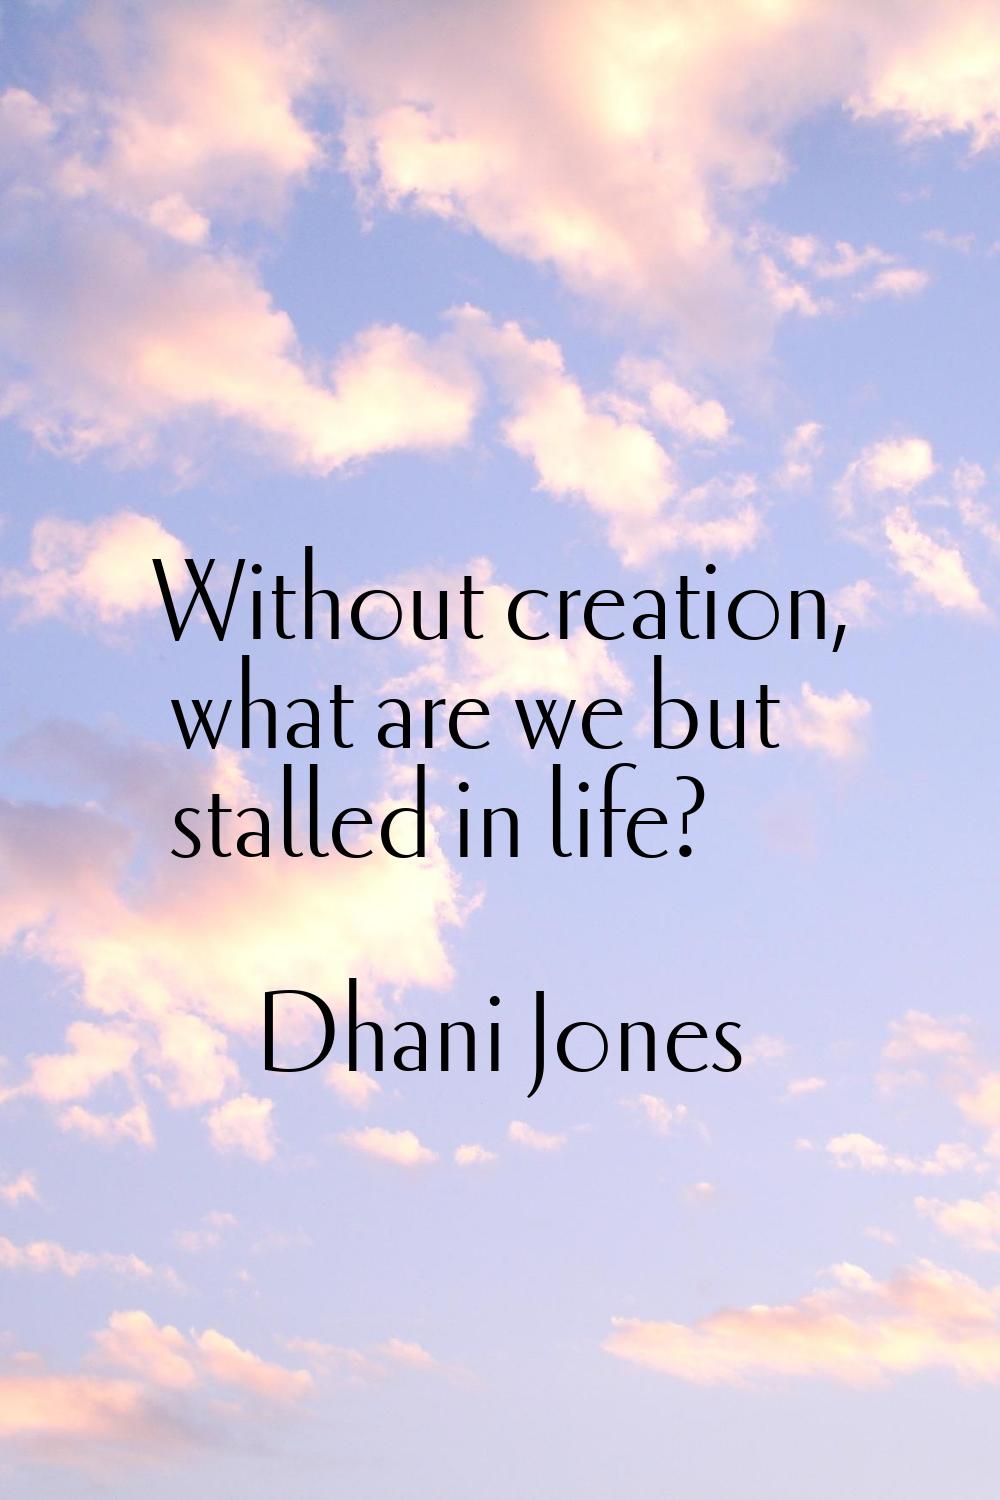 Without creation, what are we but stalled in life?